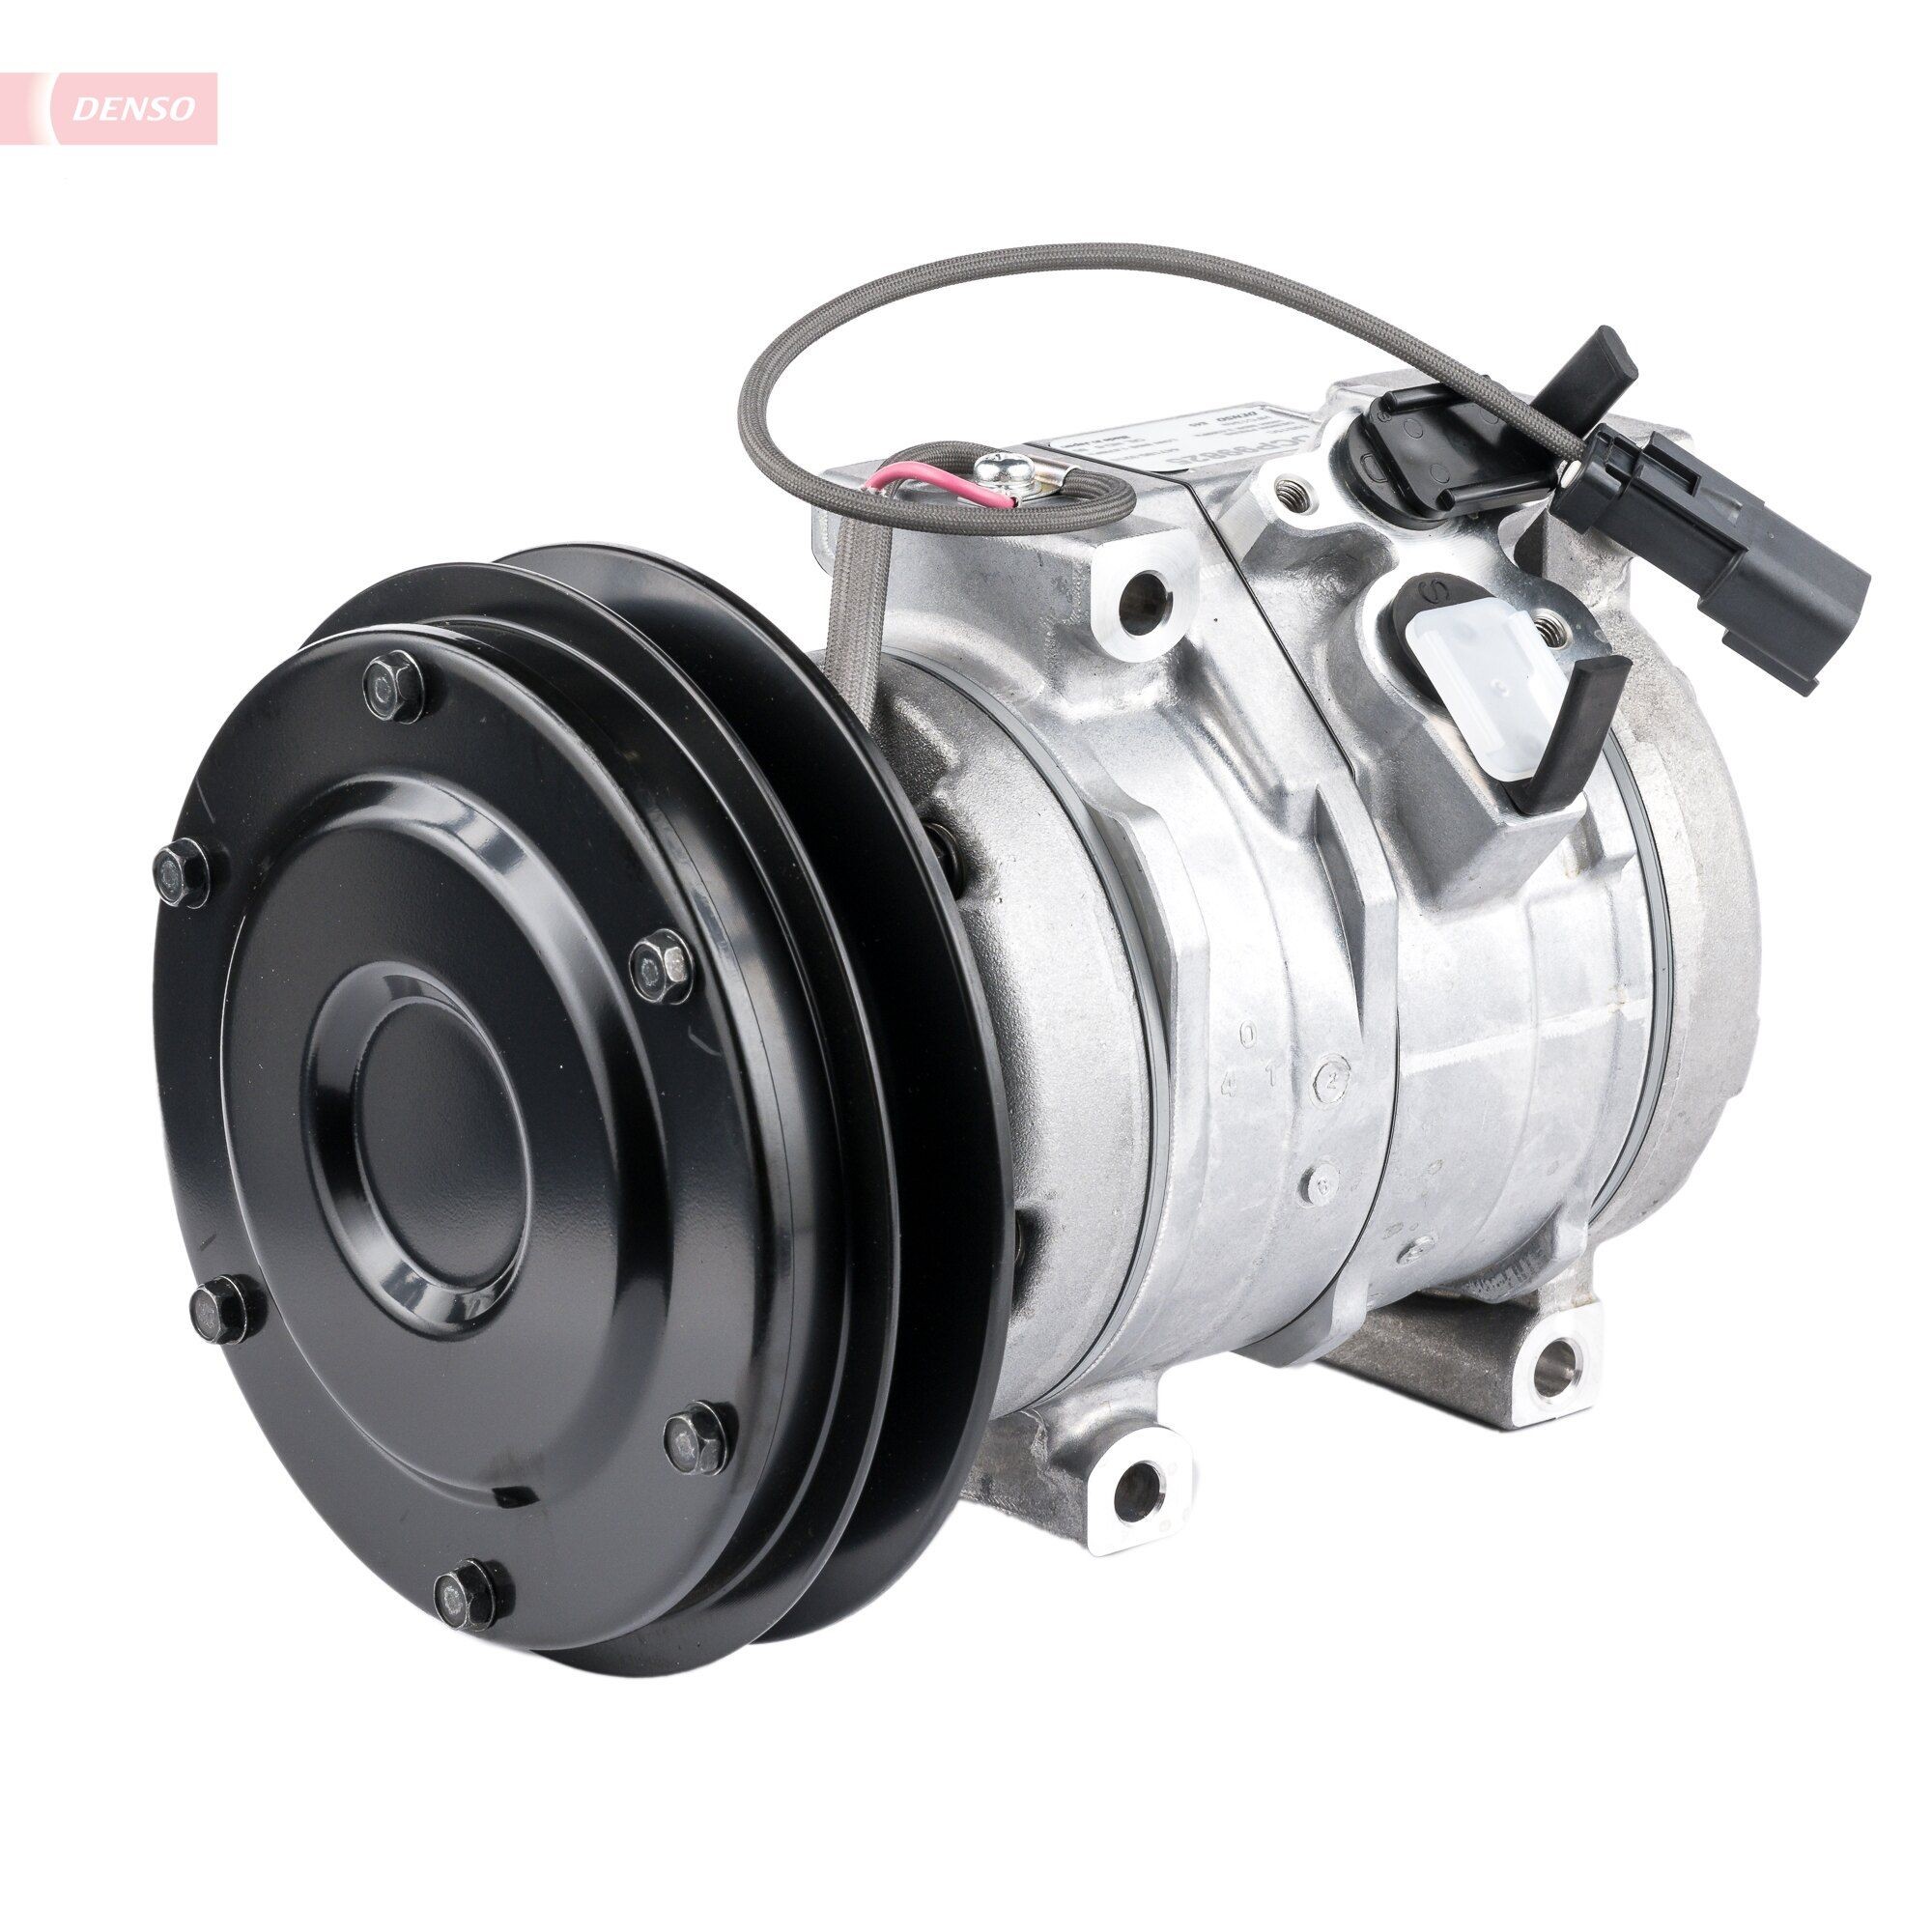 DENSO 10S15C, 24V, PAG 46, R 134a, with magnetic clutch Belt Pulley Ø: 150mm, Number of grooves: 1 AC compressor DCP99825 buy